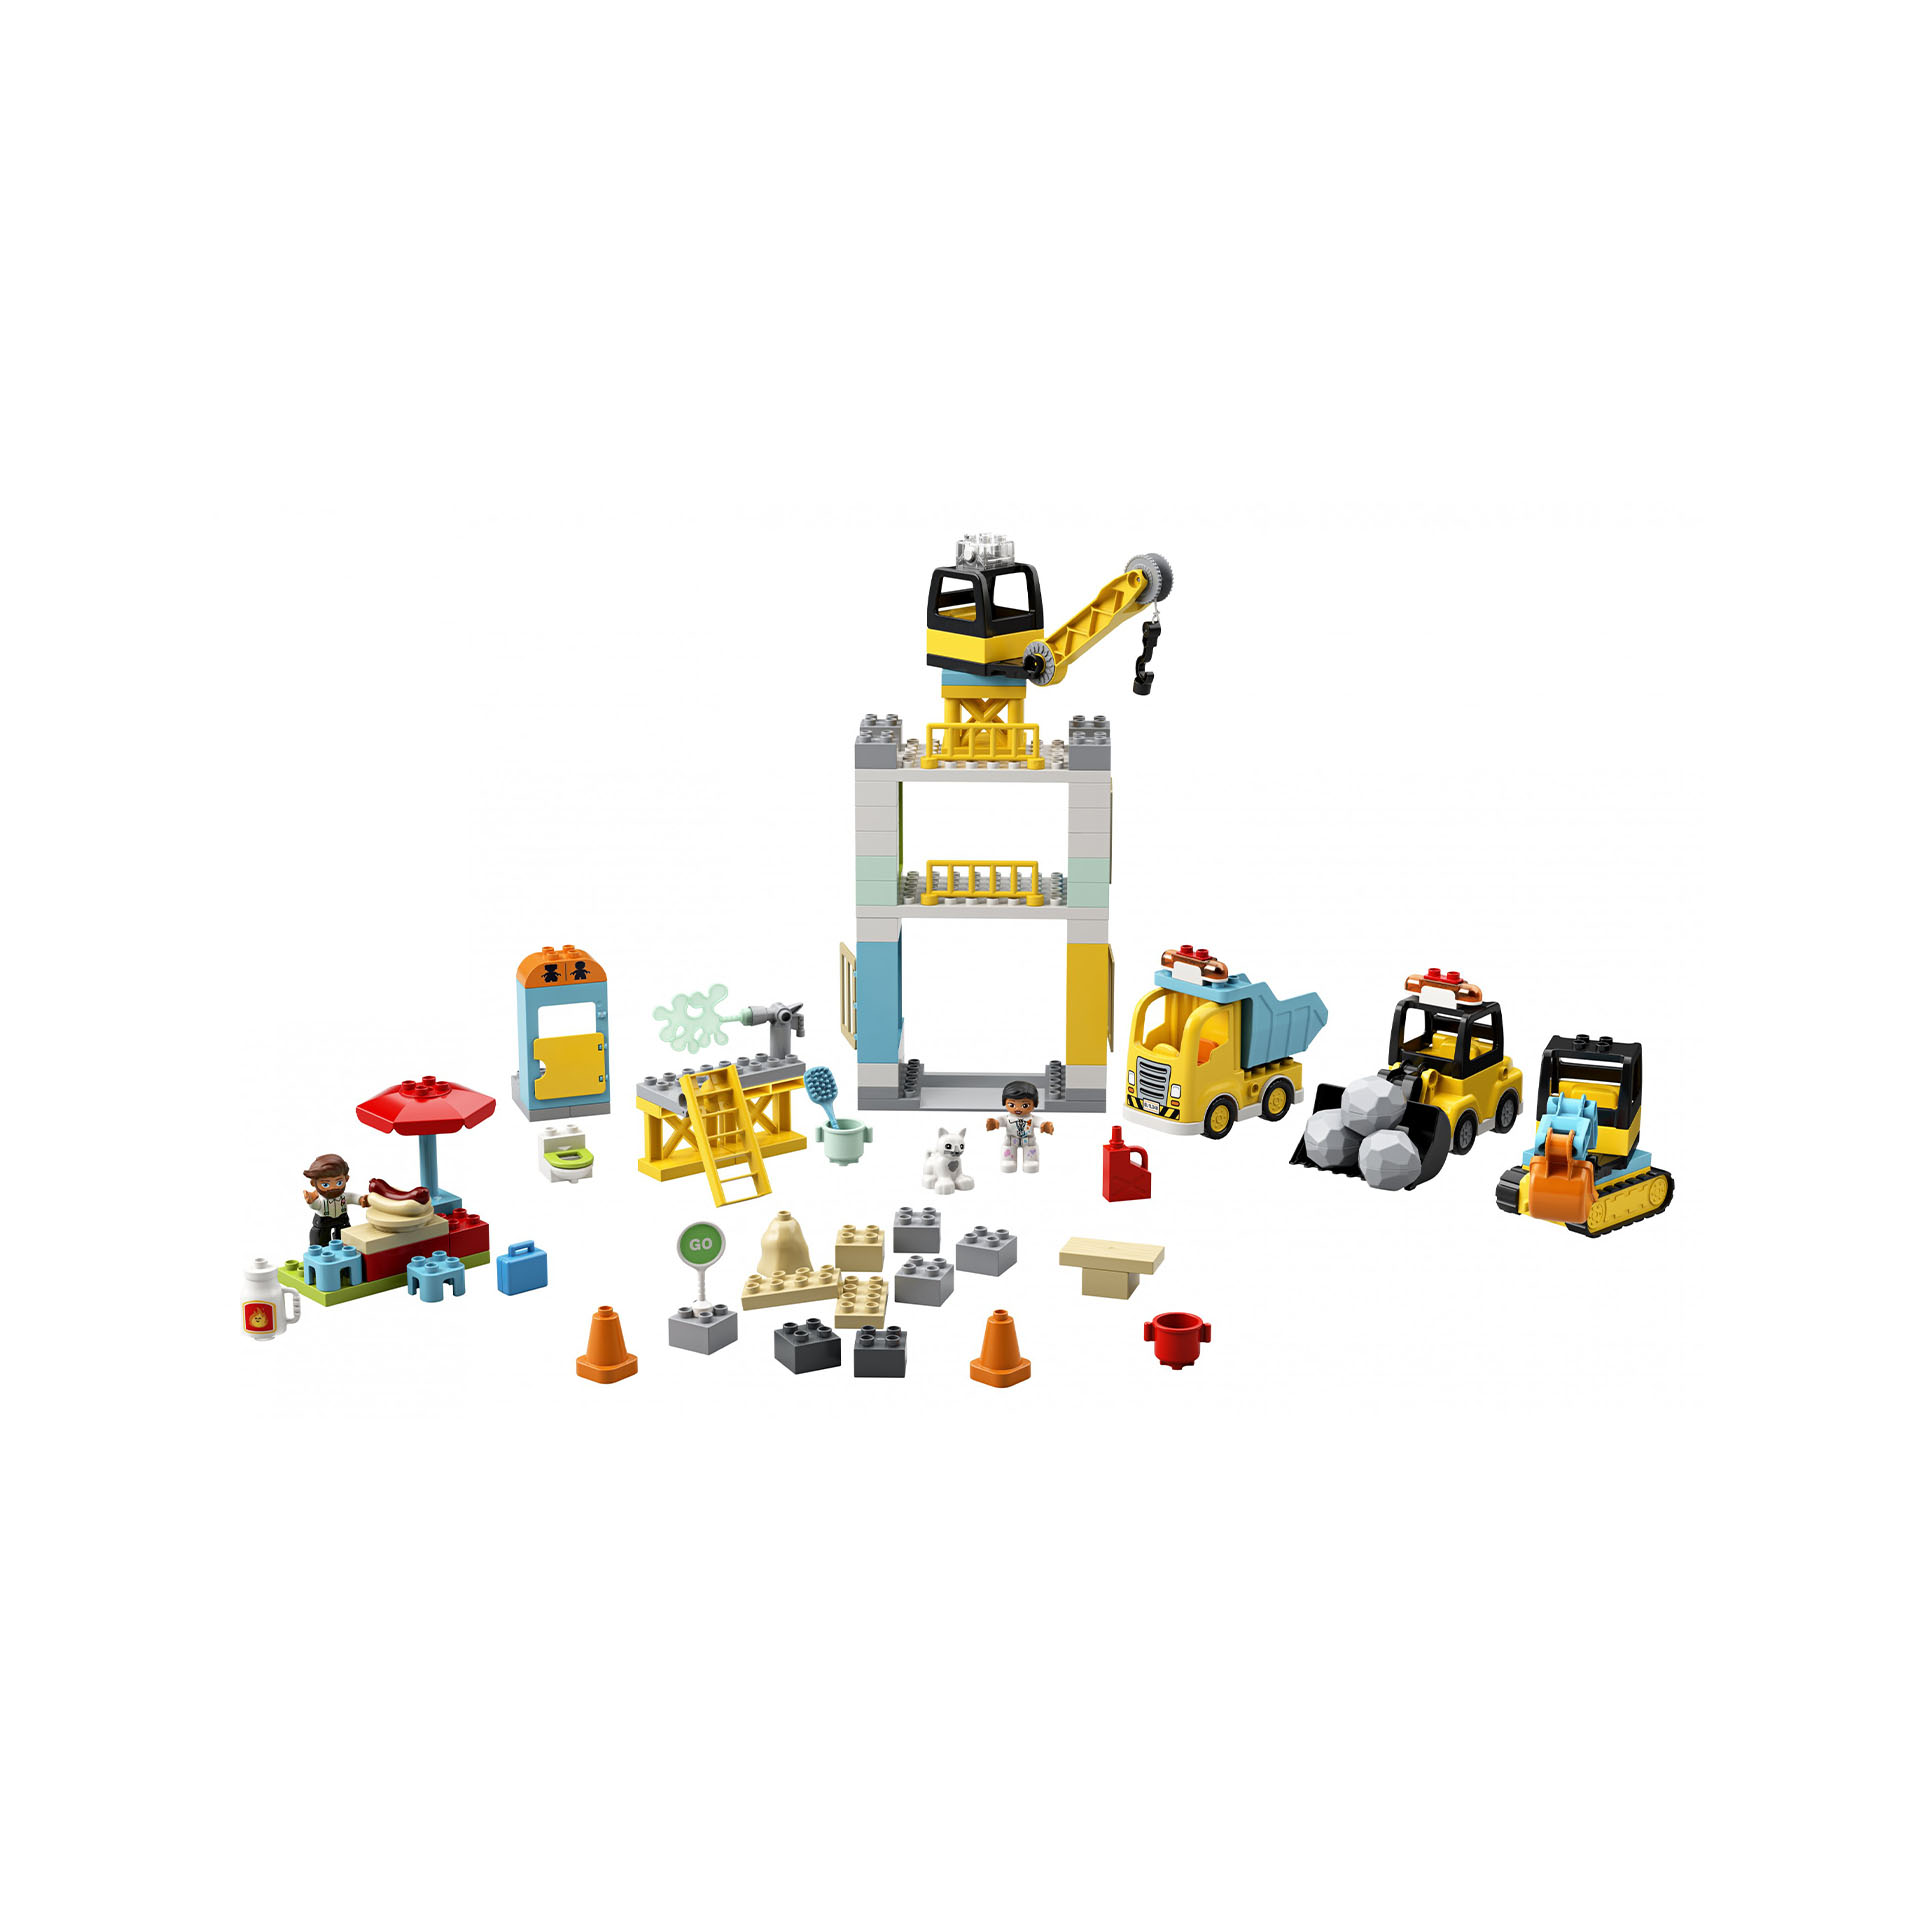 LEGO Duplo Cantiere edile con gru a torre 10933, , large